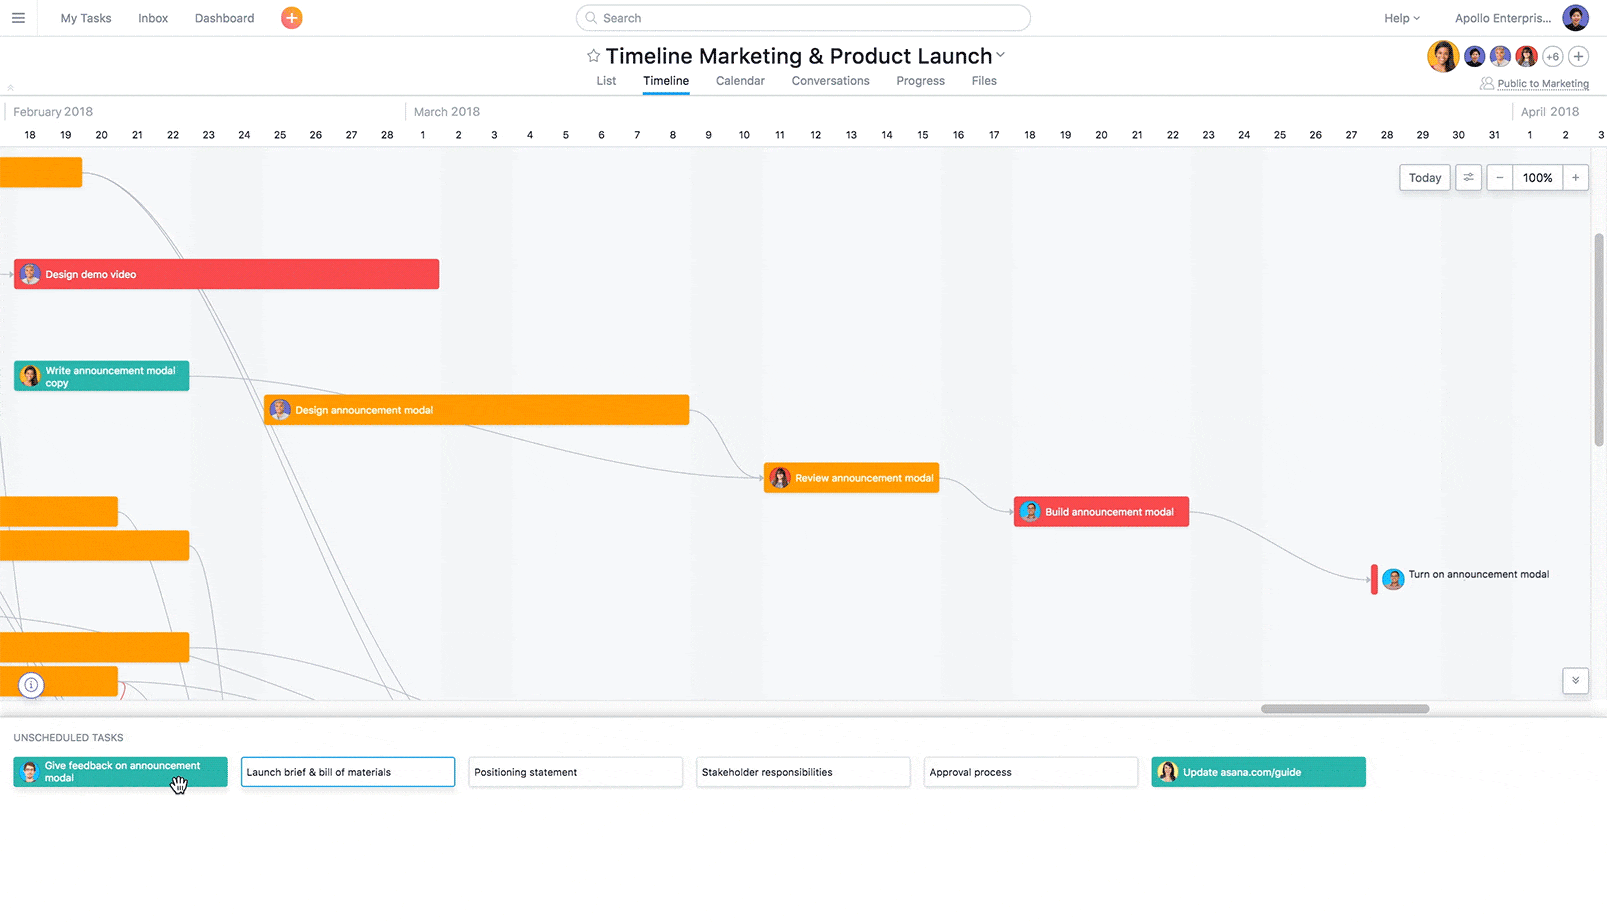 How to add a task in Asana Timeline